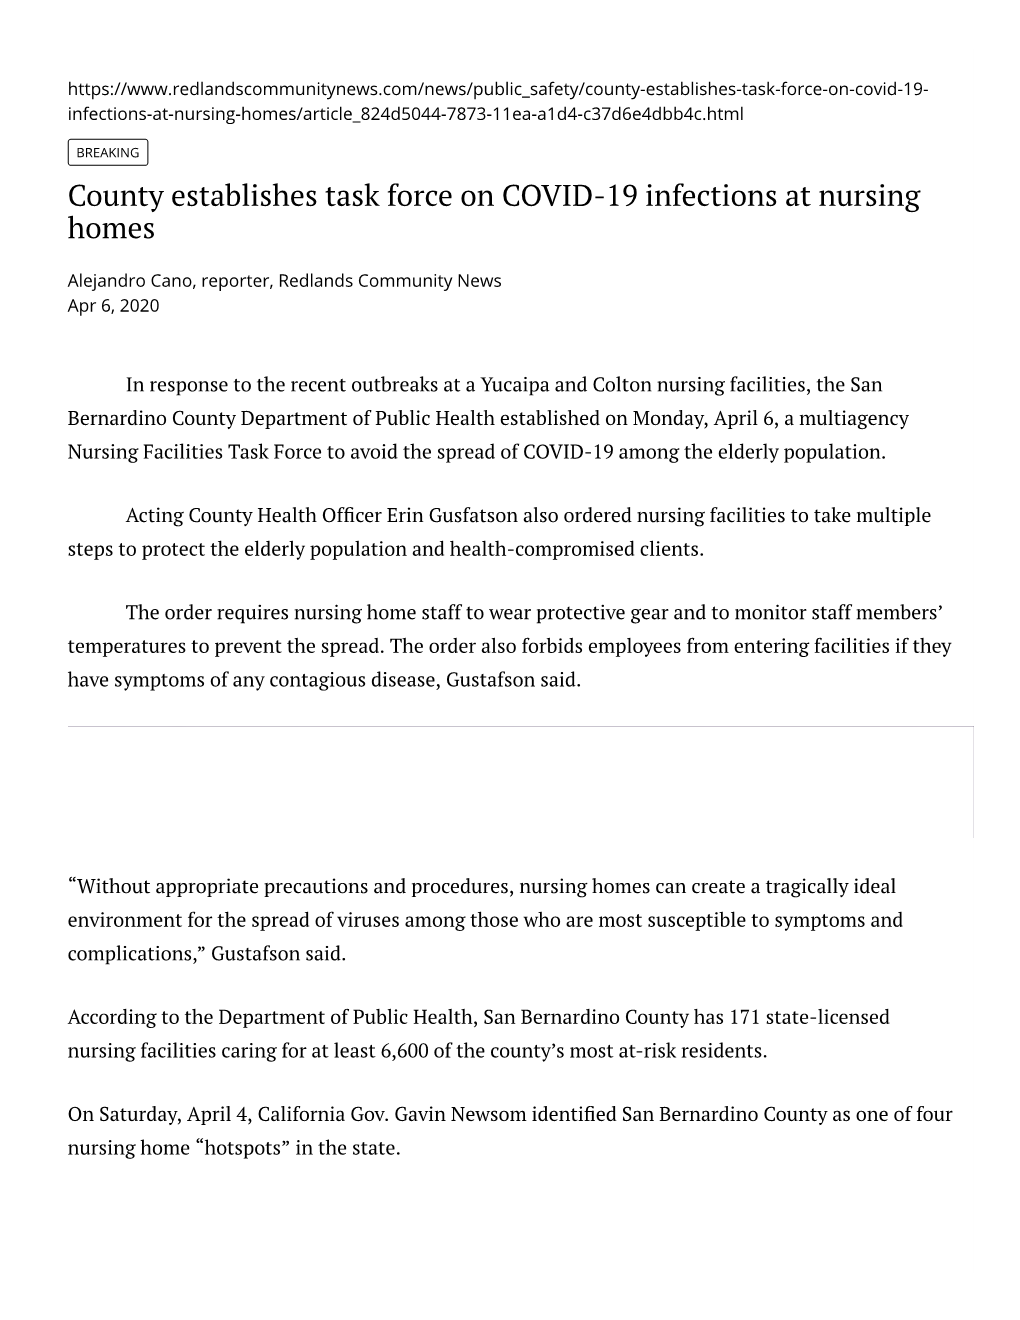 County Establishes Task Force on COVID-19 Infections at Nursing Homes